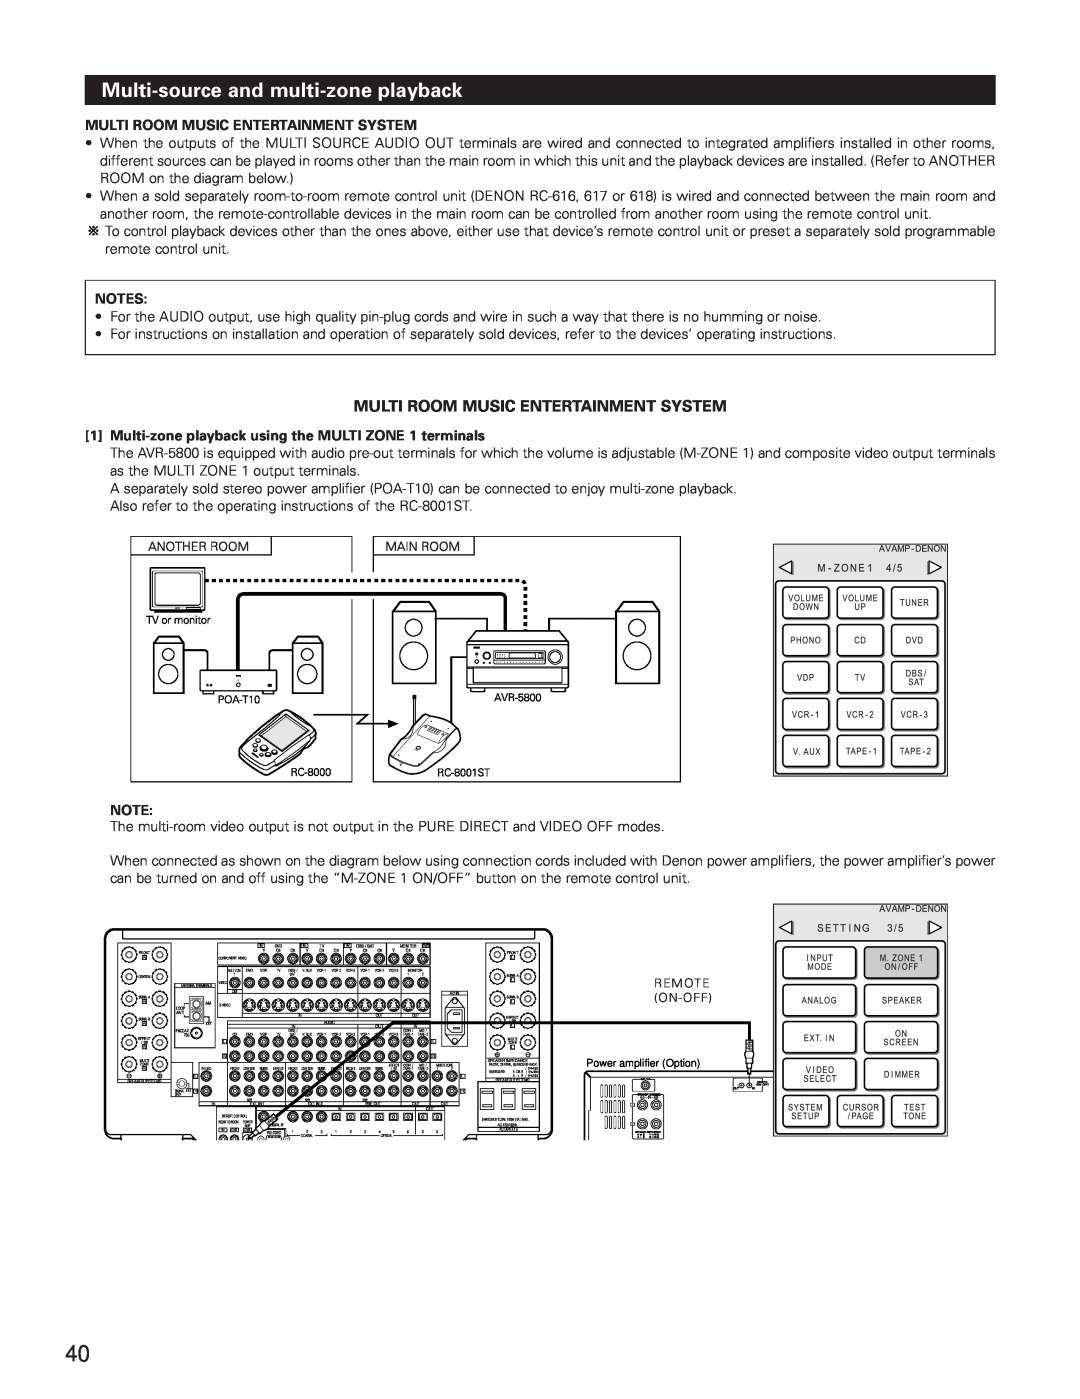 Denon AVR-5800 operating instructions Multi-sourceand multi-zoneplayback, Multi Room Music Entertainment System 